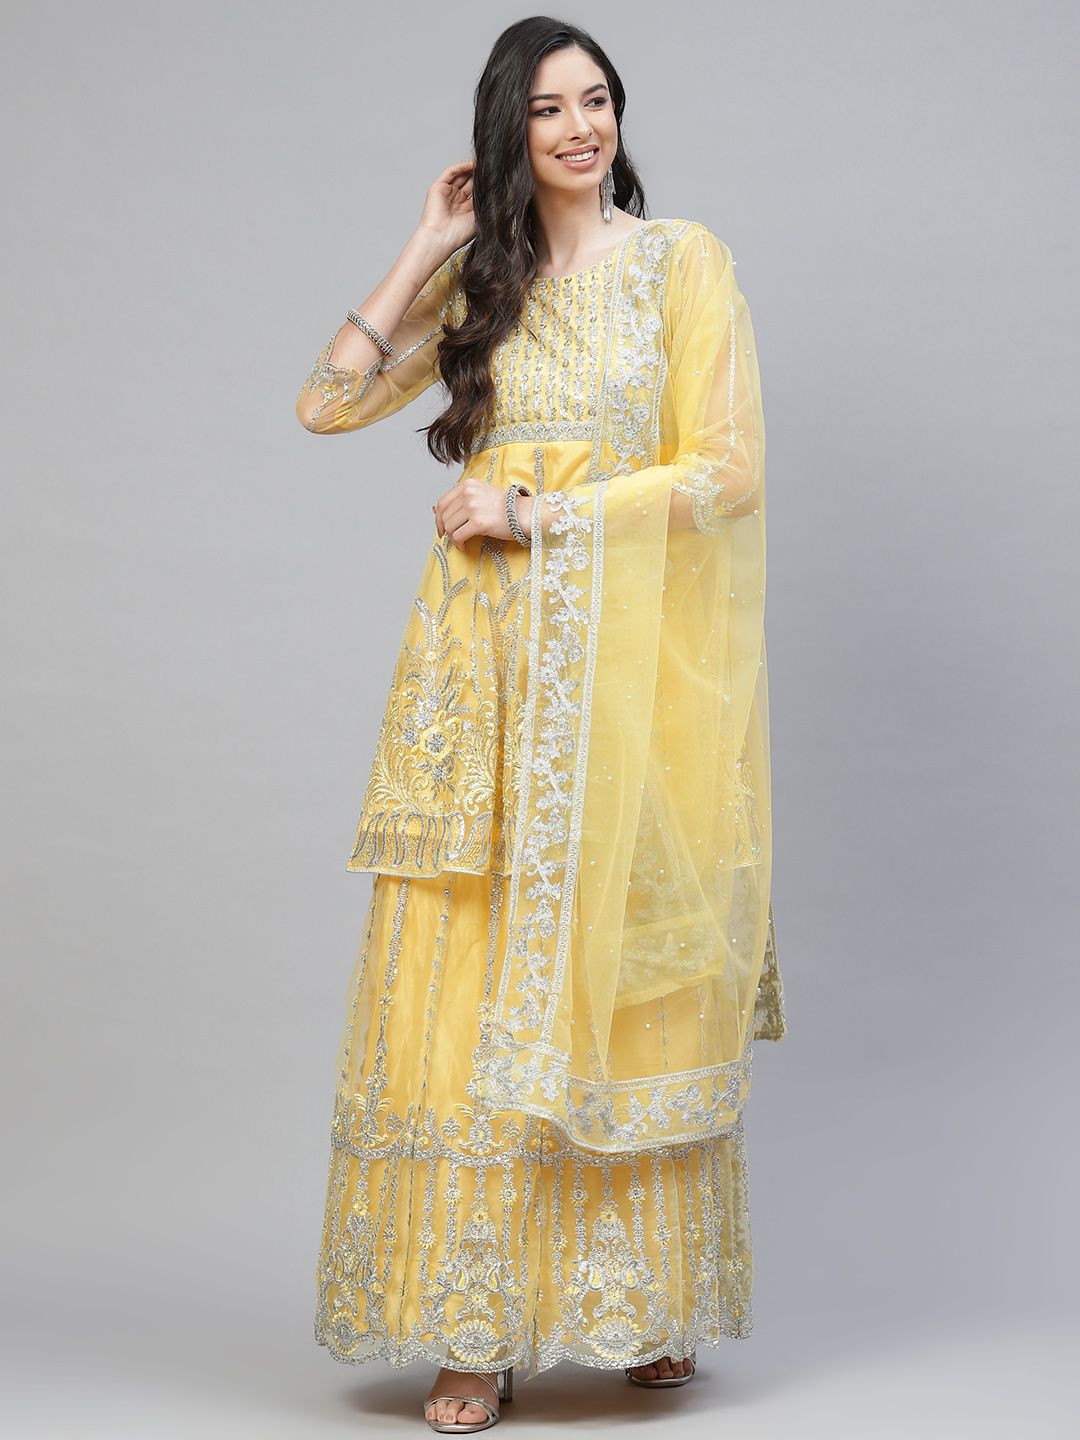 Readiprint Fashions Women Yellow Embroidered Semi-Stitched Dress Material Price in India